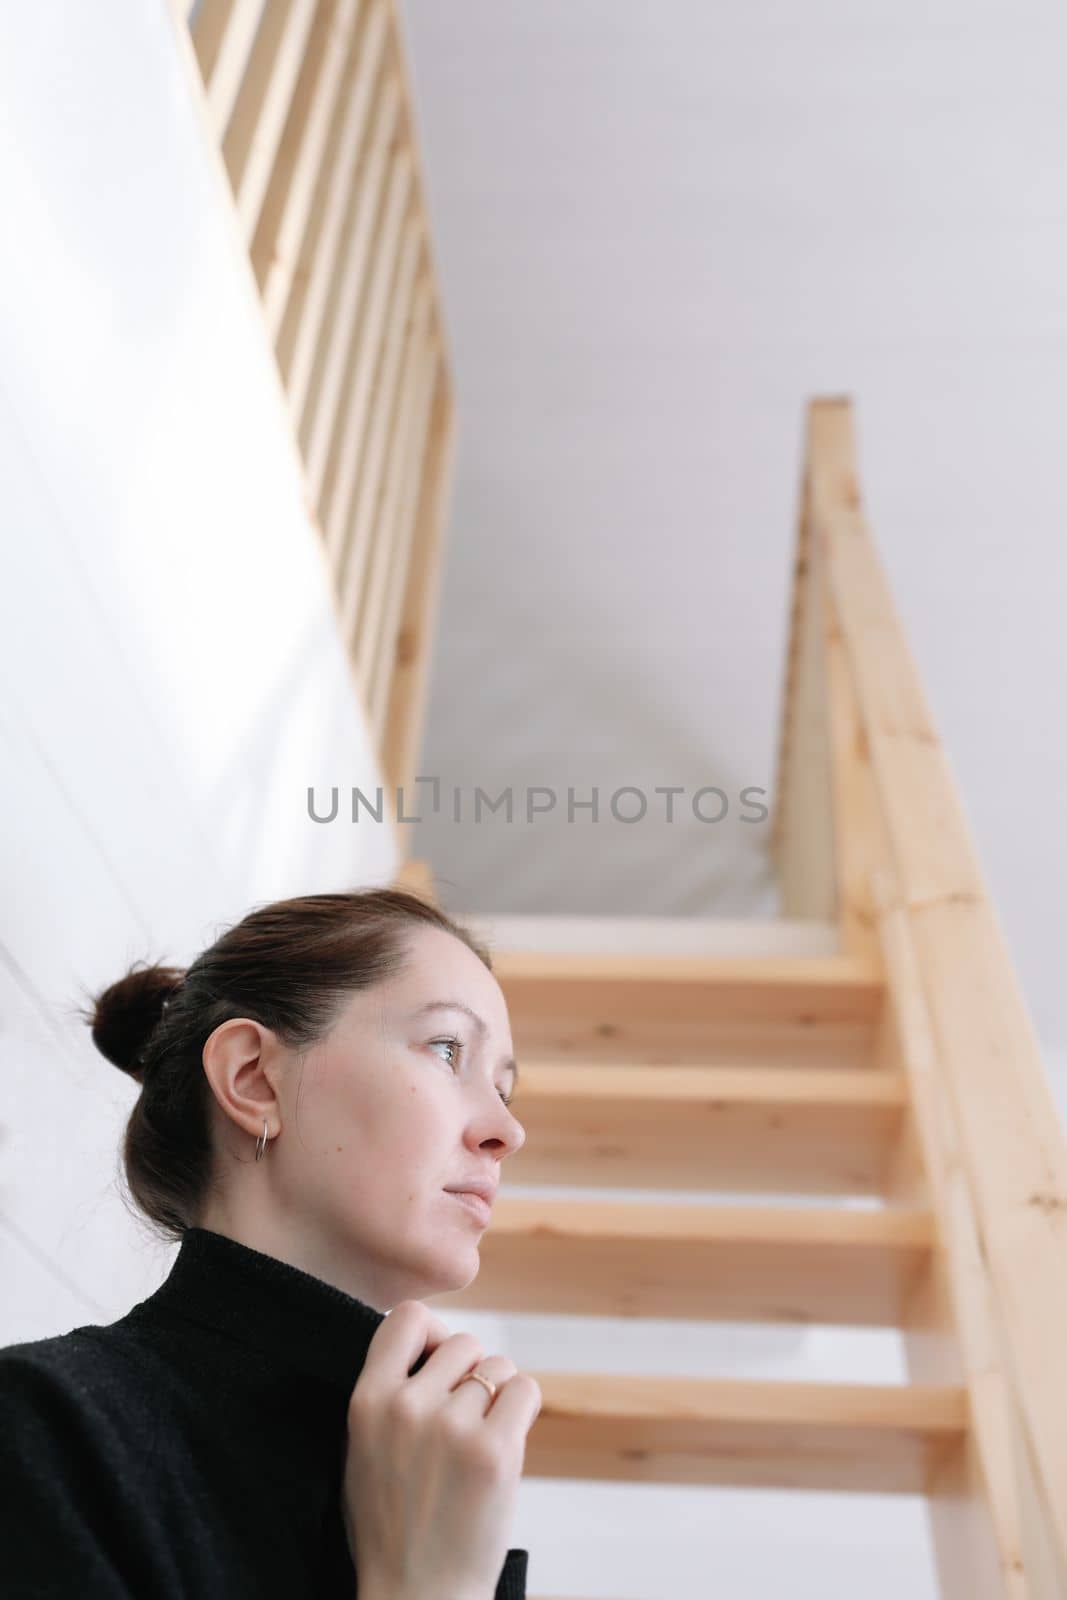 Young woman simple hairstyle against wooden stairs. Depression, loneliness and quarantine concept. Mental health, Self care, staying home